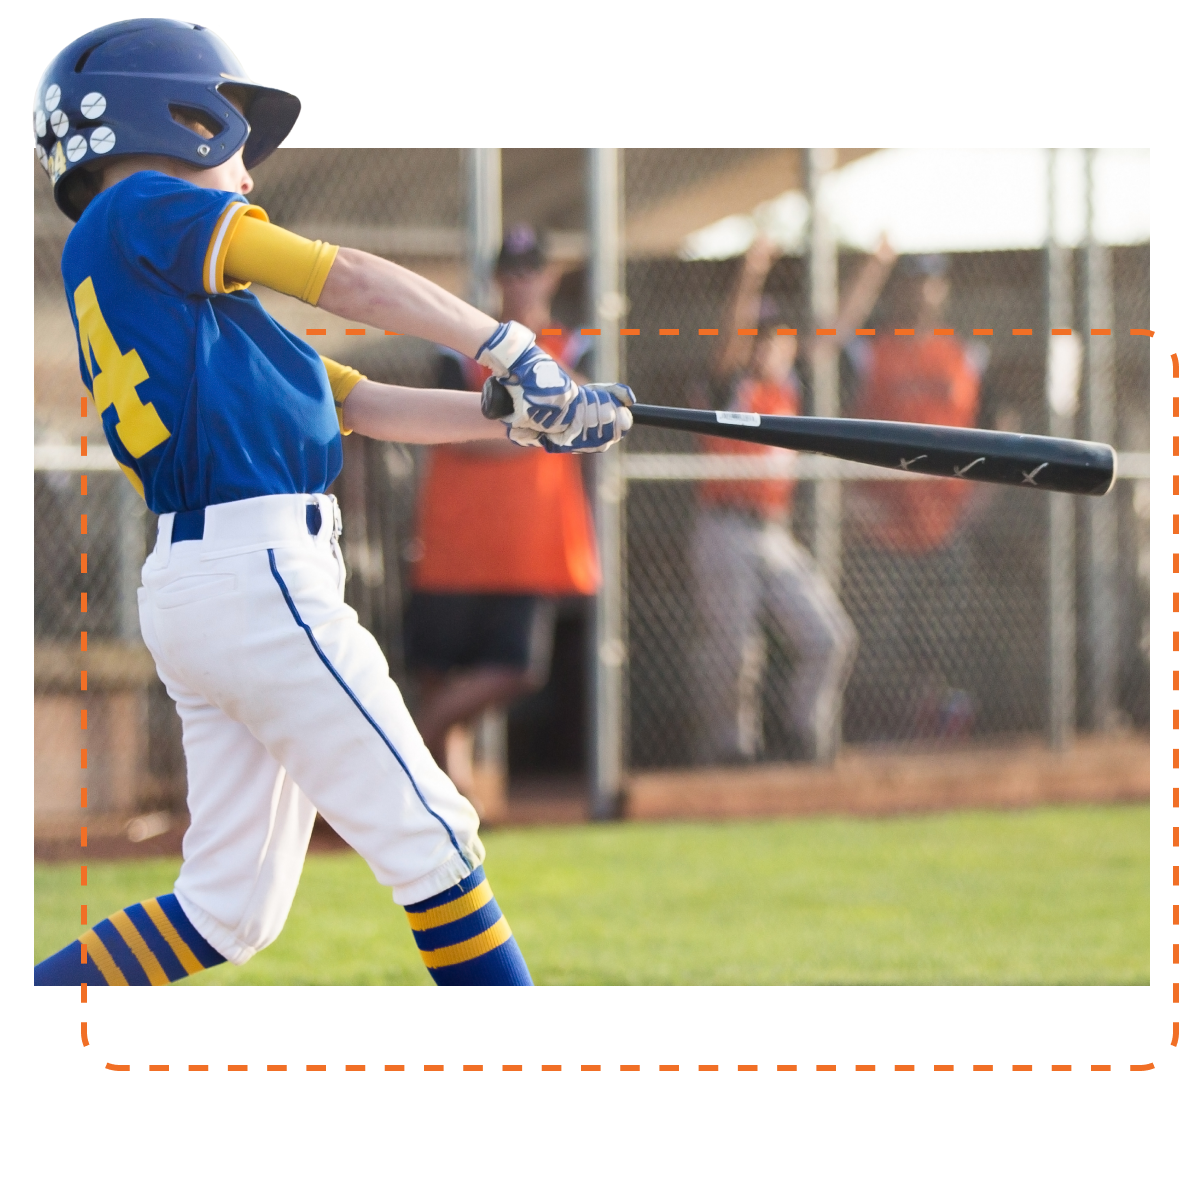 A youth baseball player in a blue and gold uniform is mid-swing after hitting a baseball, with focus on the player and a blurred background of a dugout and spectators, capturing a moment of athletic performance on the field.